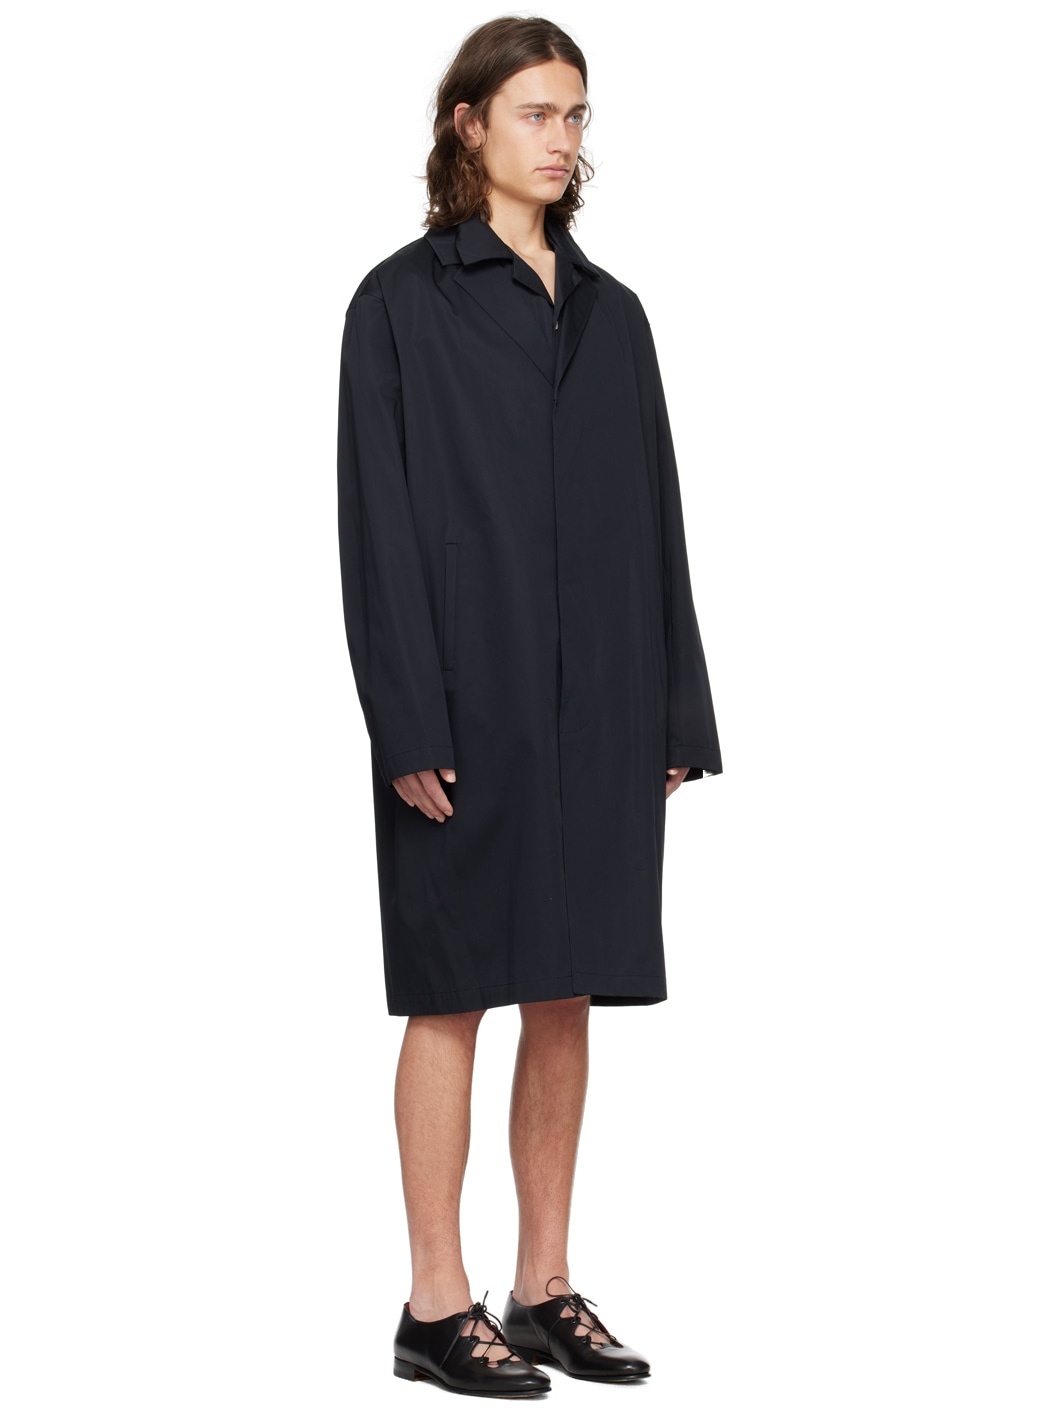 Black Notched Lapel Trench Coat - 2